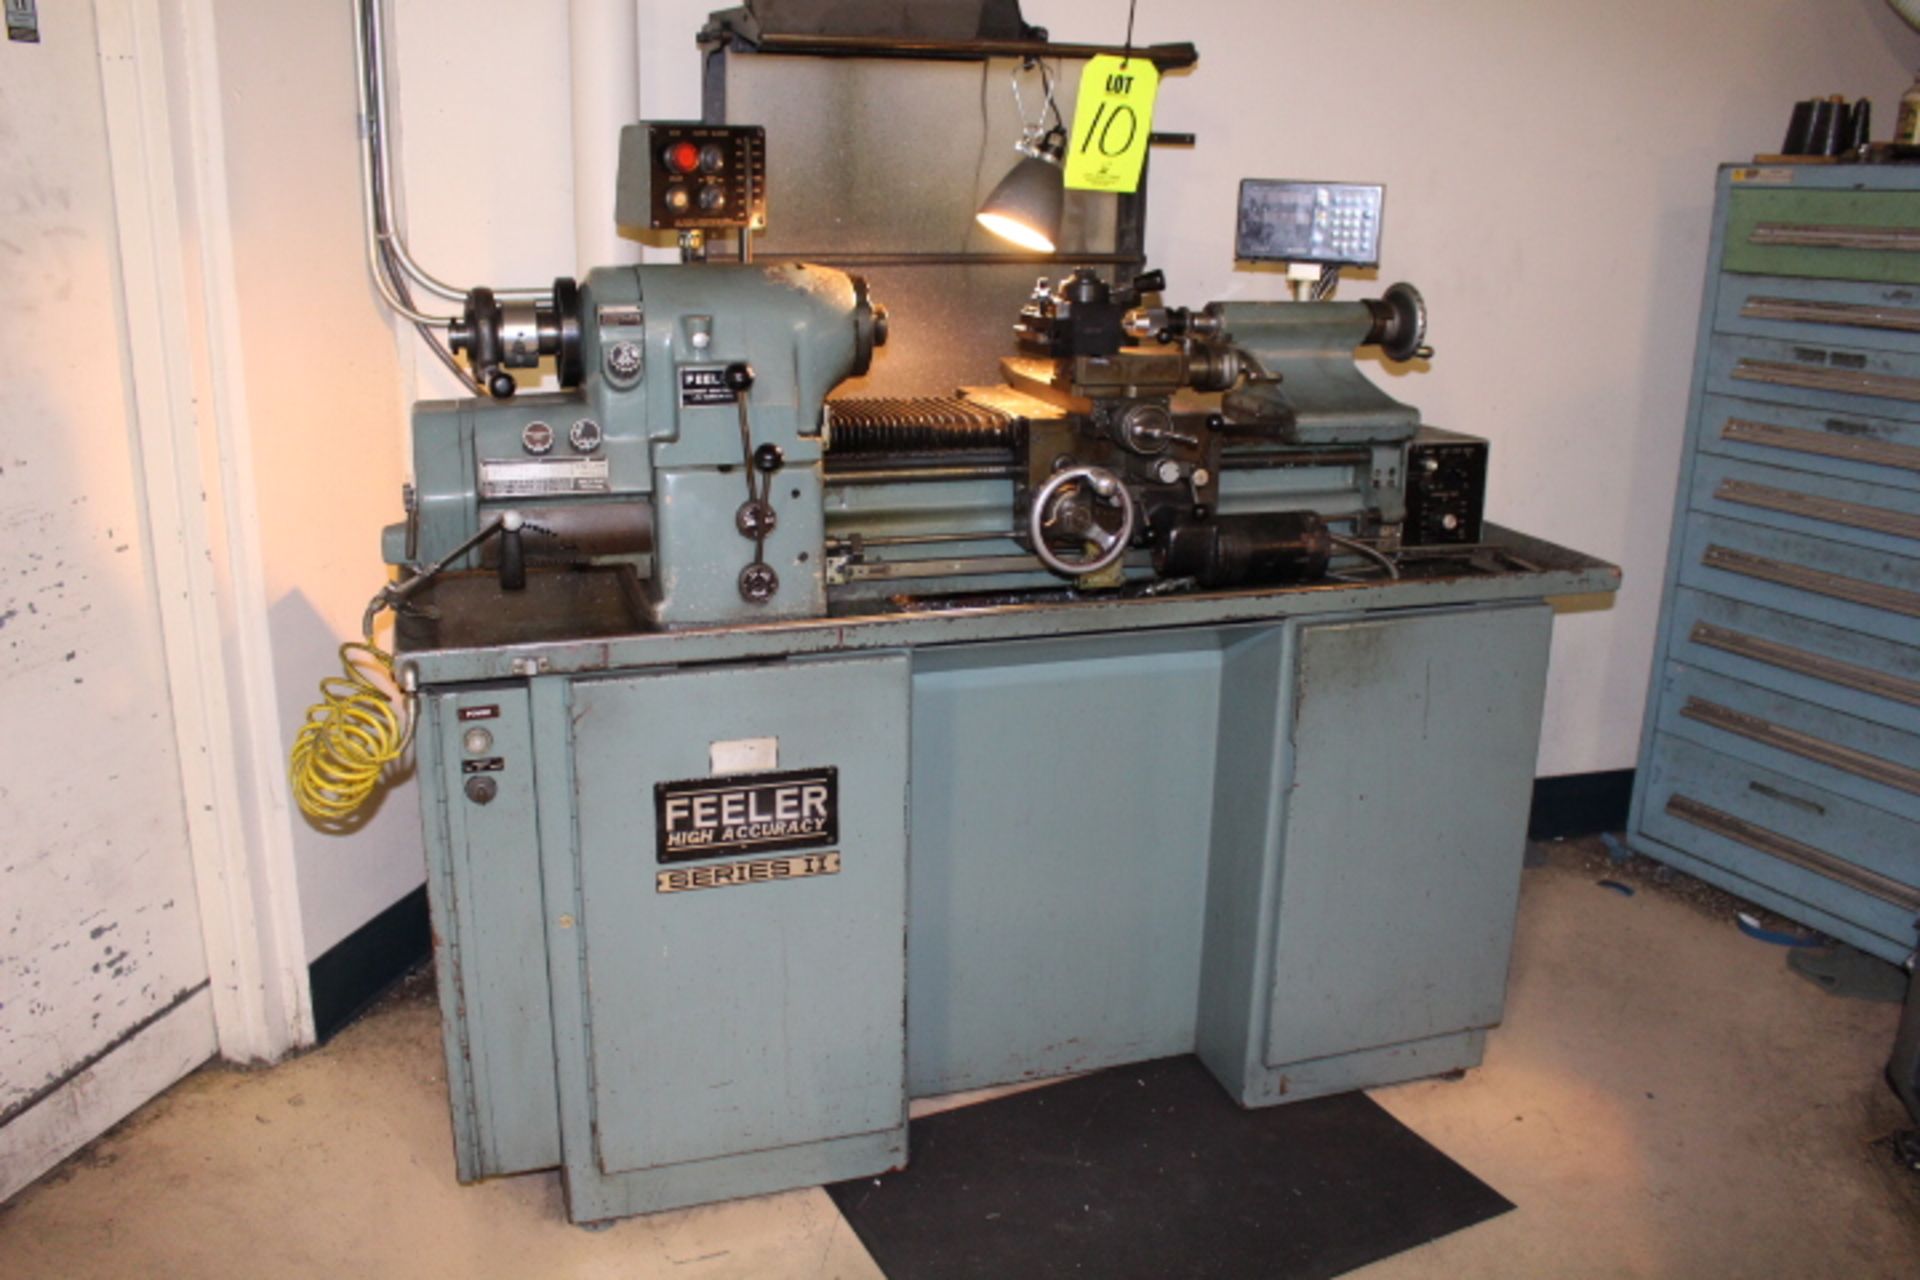 FEELER SERIES II PRECISION LATHE, 11” X 24” HIGH ACCURACY LATHE, SPINDLE SPEEDS UP TO 2,955-RPM,